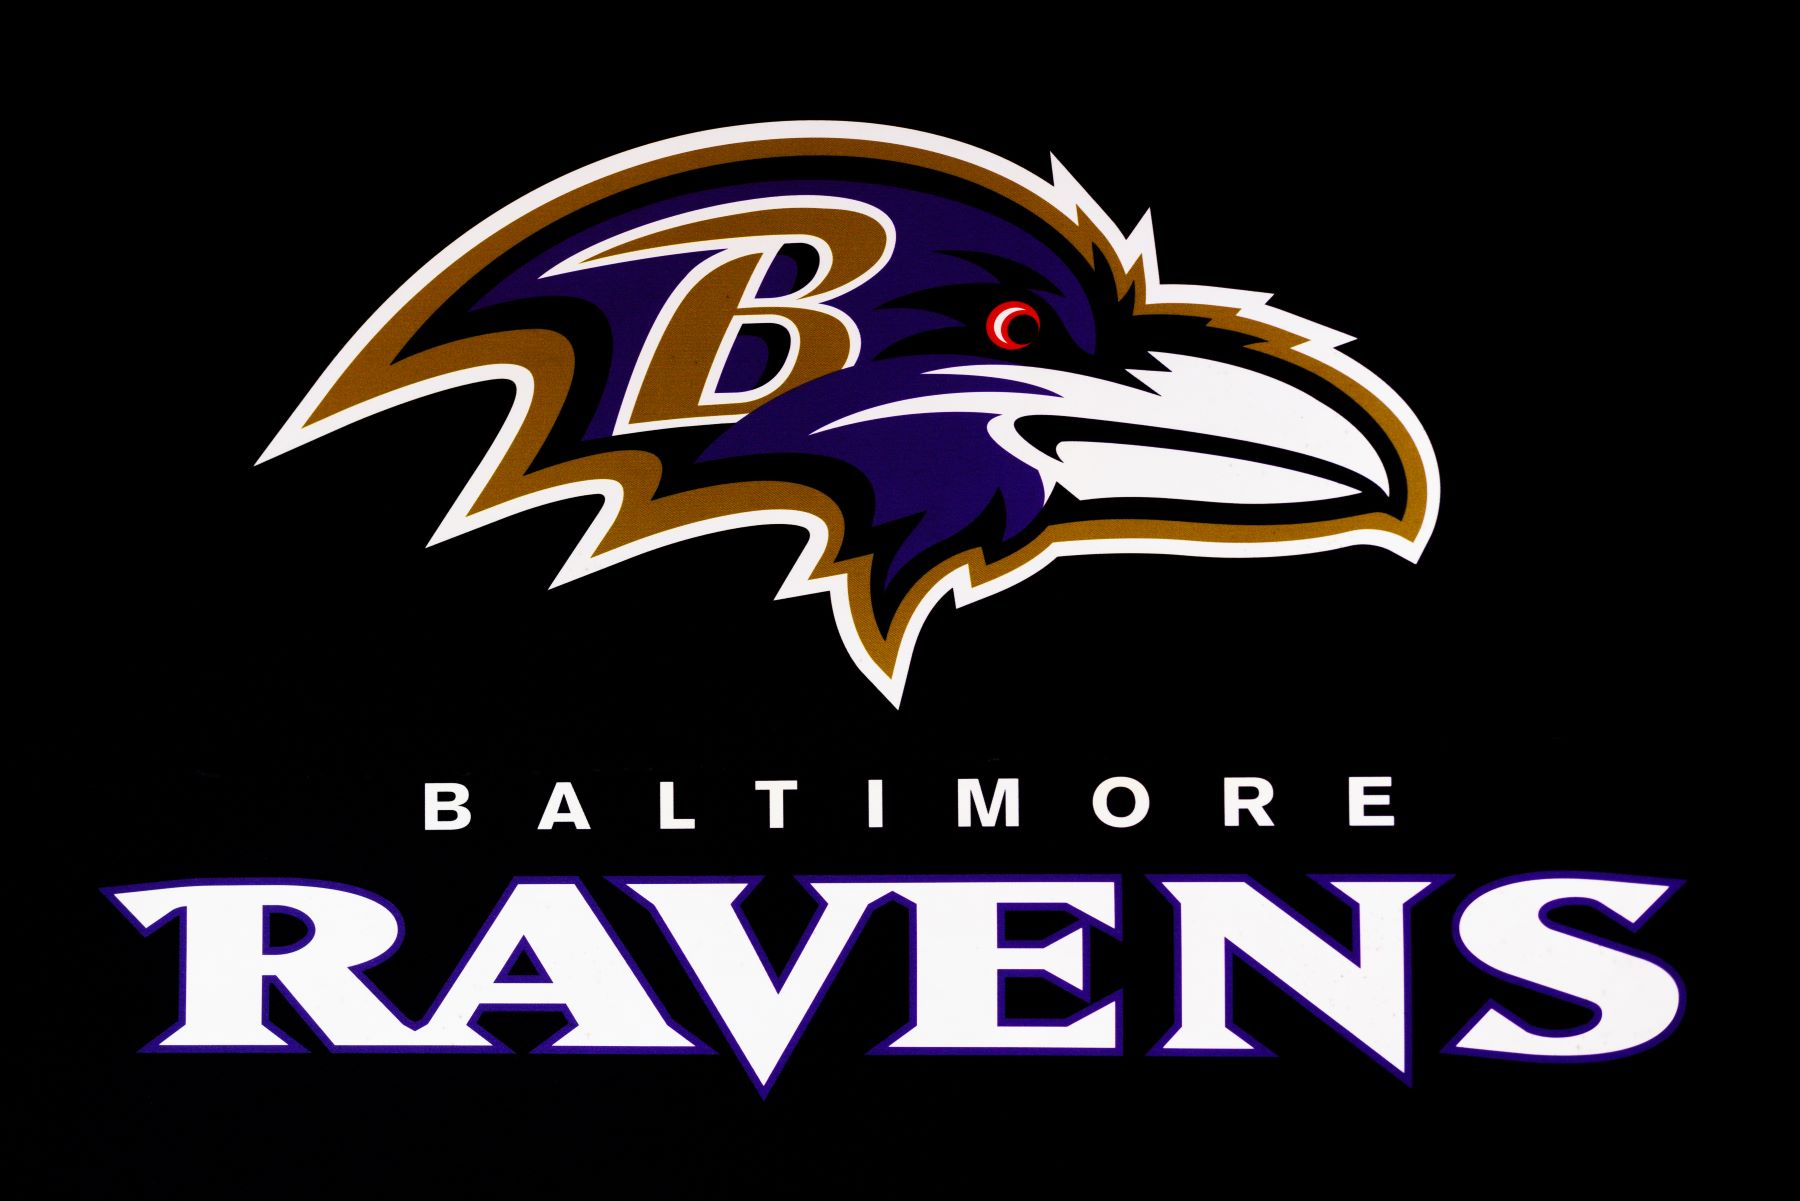 NFL team Baltimore Ravens logo seen at the Los Angeles Convention Center during the Super Bowl Experience